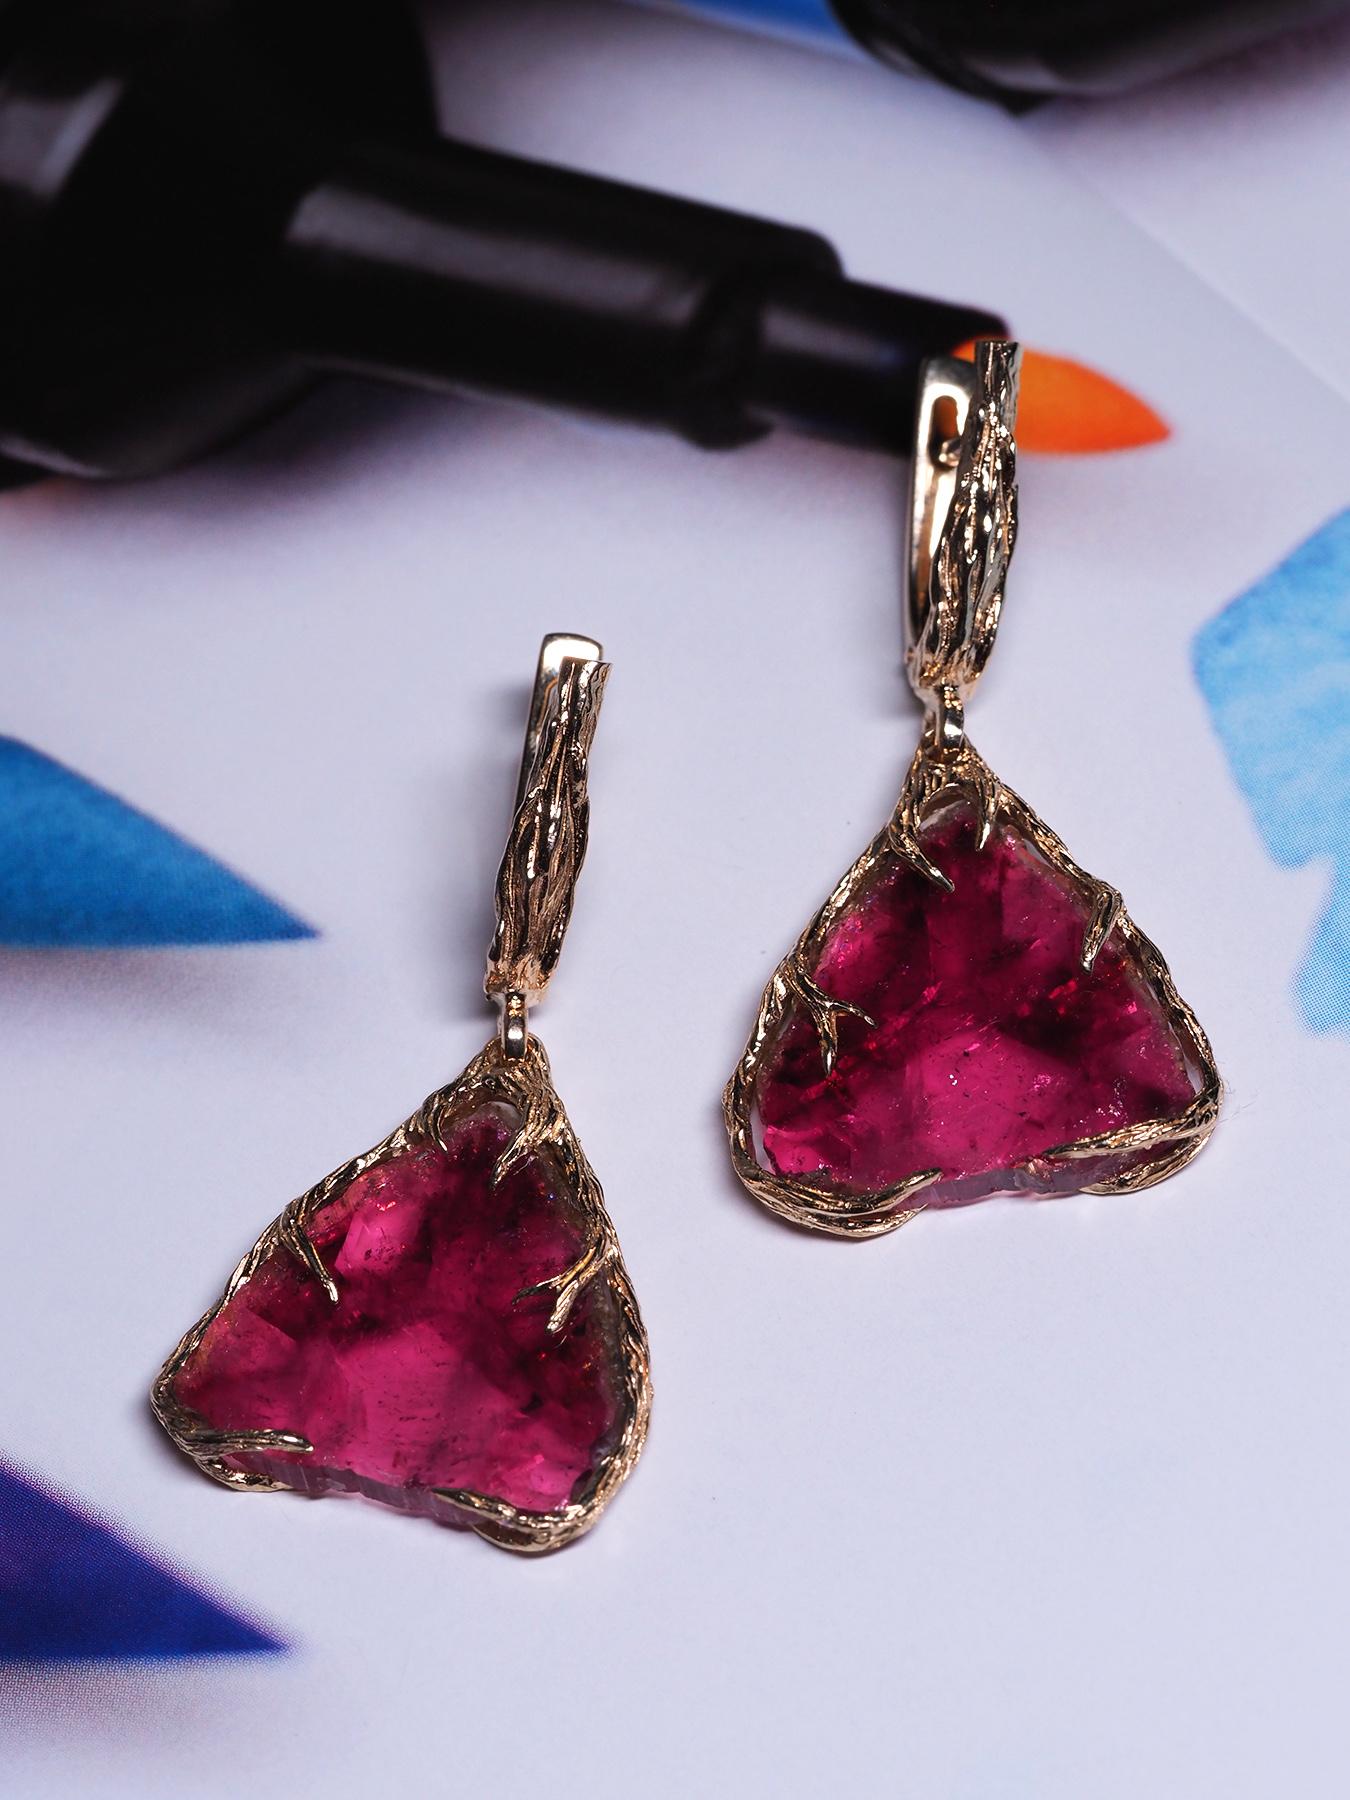 Uncut Rubellite Earrings Gold Natural Red Pink Tourmaline Gemstone Art Nouveau Style For Sale